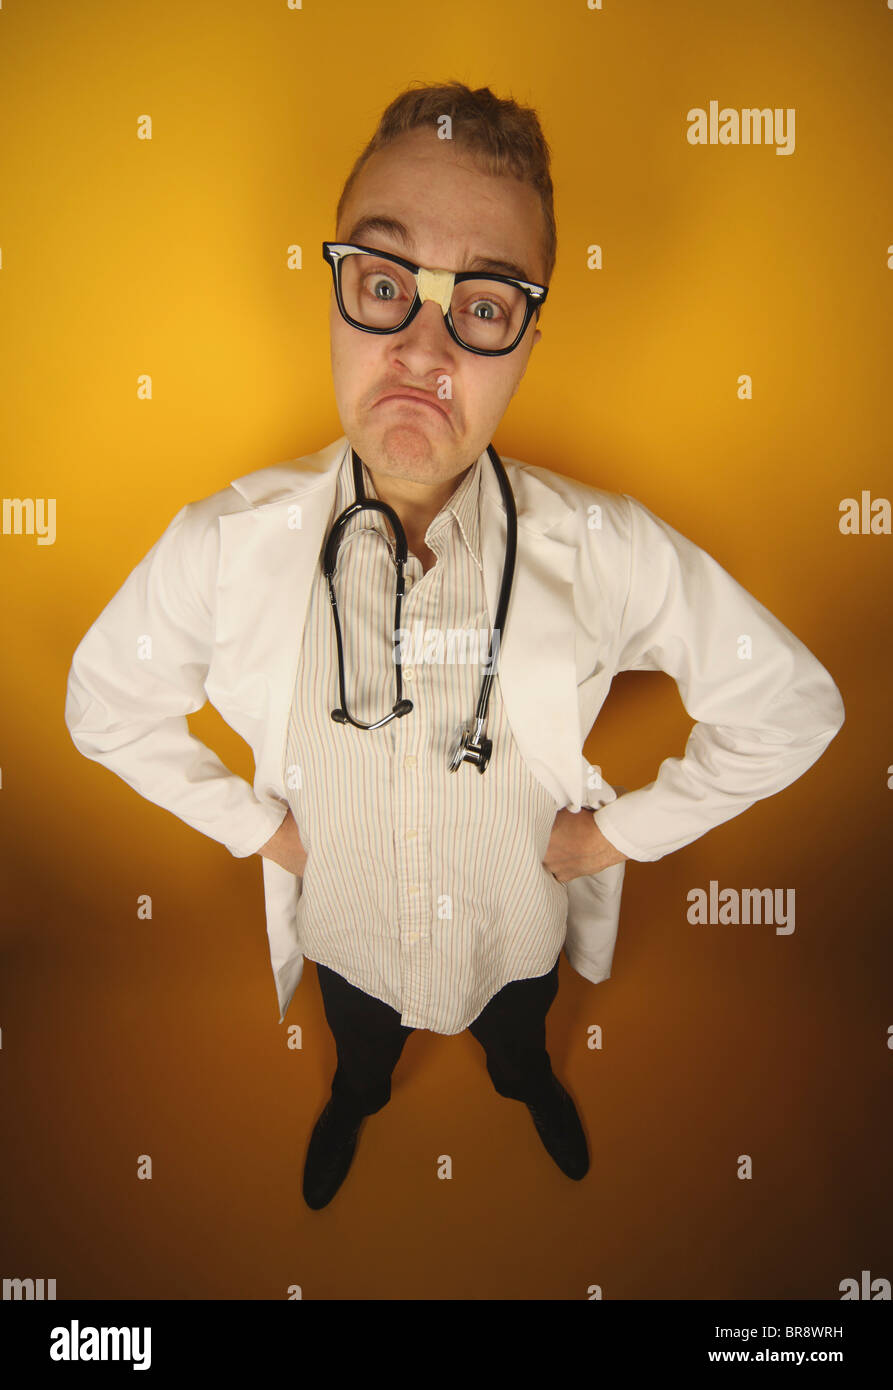 A Funny Doctor With A Frown; Edmonton, Alberta, Canada Stock Photo